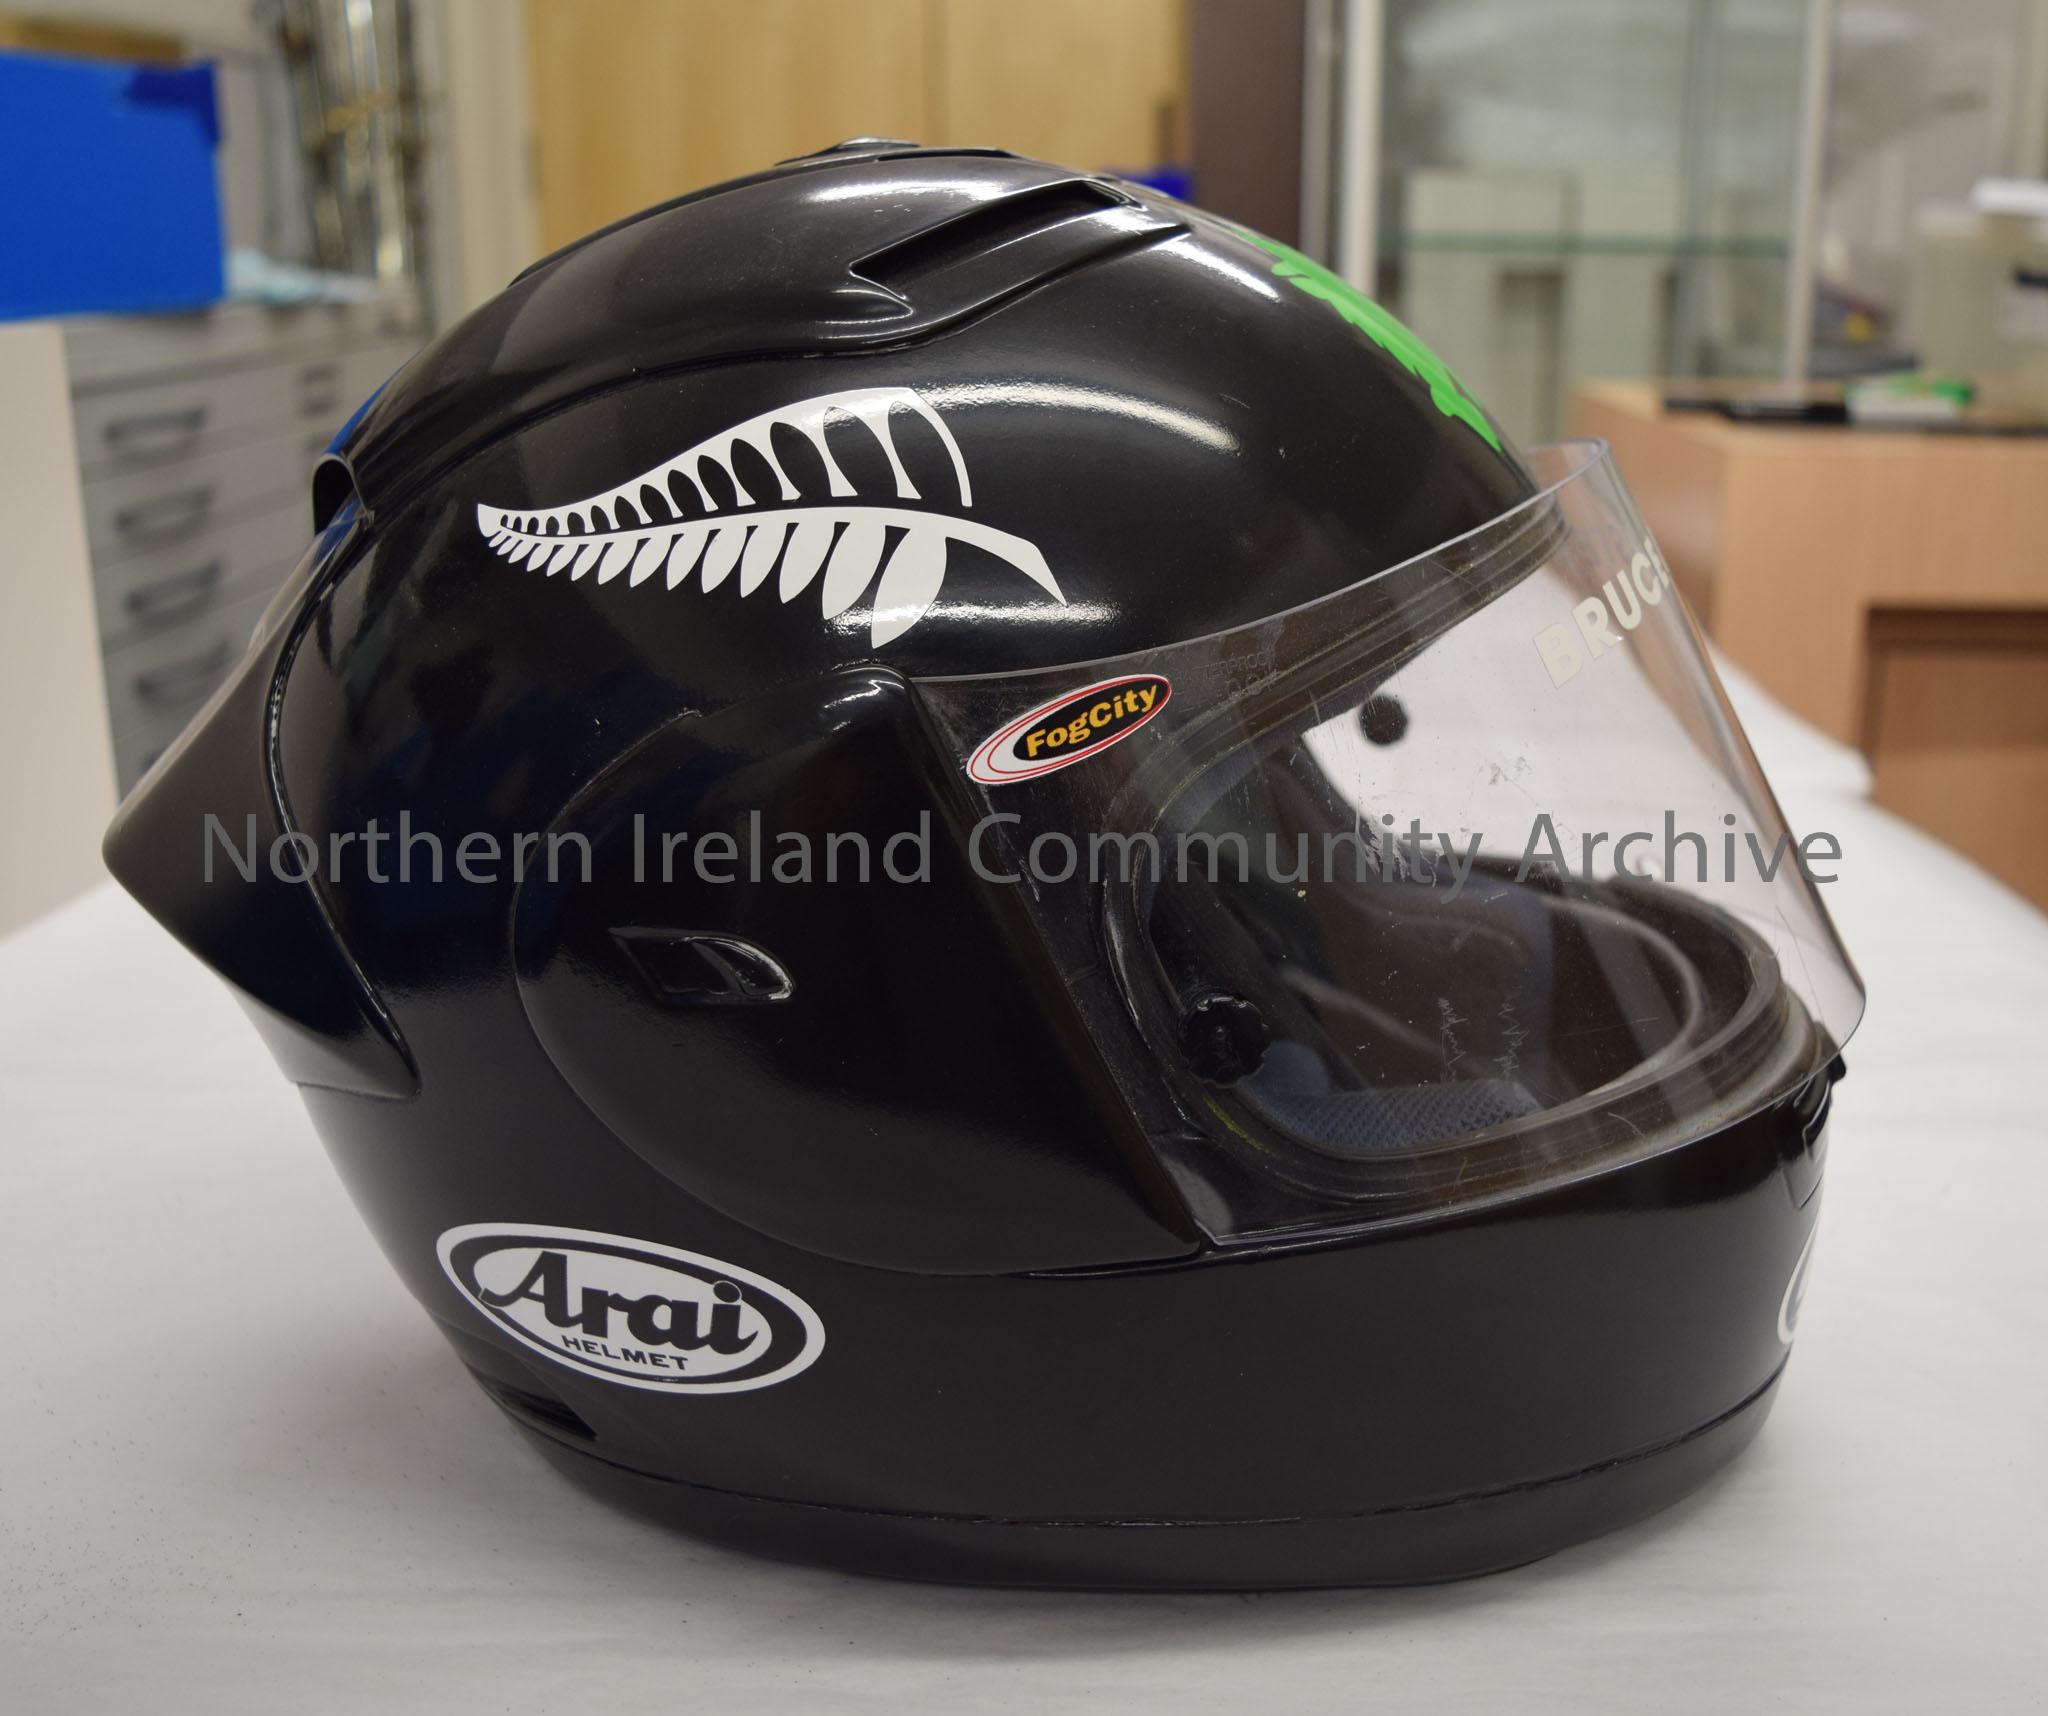 Arai motorcycle helmet belonging to Bruce Anstey. Plain black helmet with an image of a black and white fern leaf on each side and a green silhouette … – 2016.72 (5)